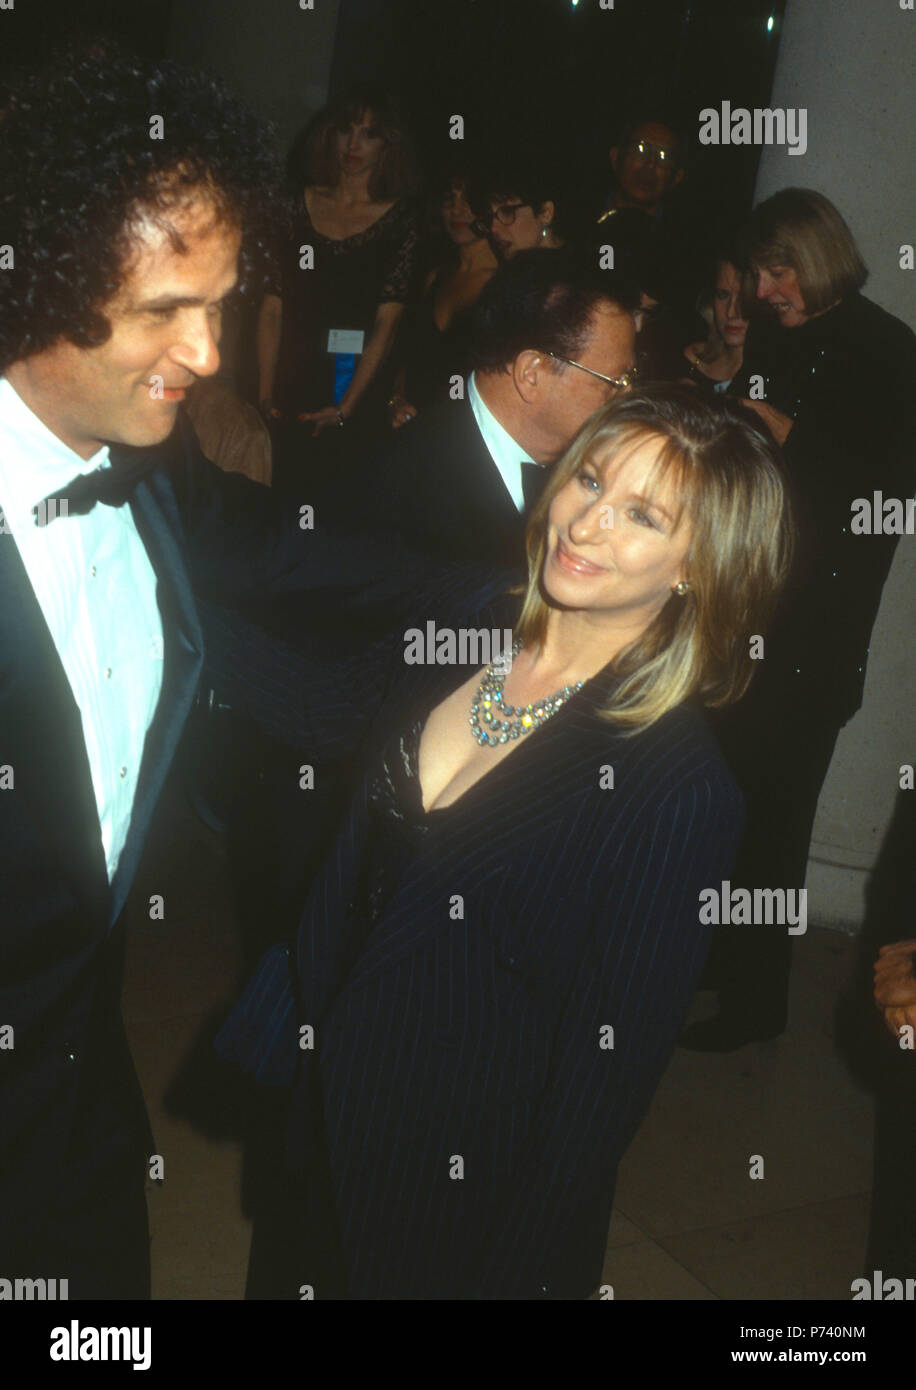 BEVERLY HILLS, CA - JANUARY 18: (L-R) Composer Richard Baskin and Singer/actress Barbra Streisand attend the 49th Annual Golden Globe Awards on January 18, 1992 at the Beverly Hilton Hotel in Beverly Hills, California. Photo by Barry King/Alamy Stock Photo Stock Photo